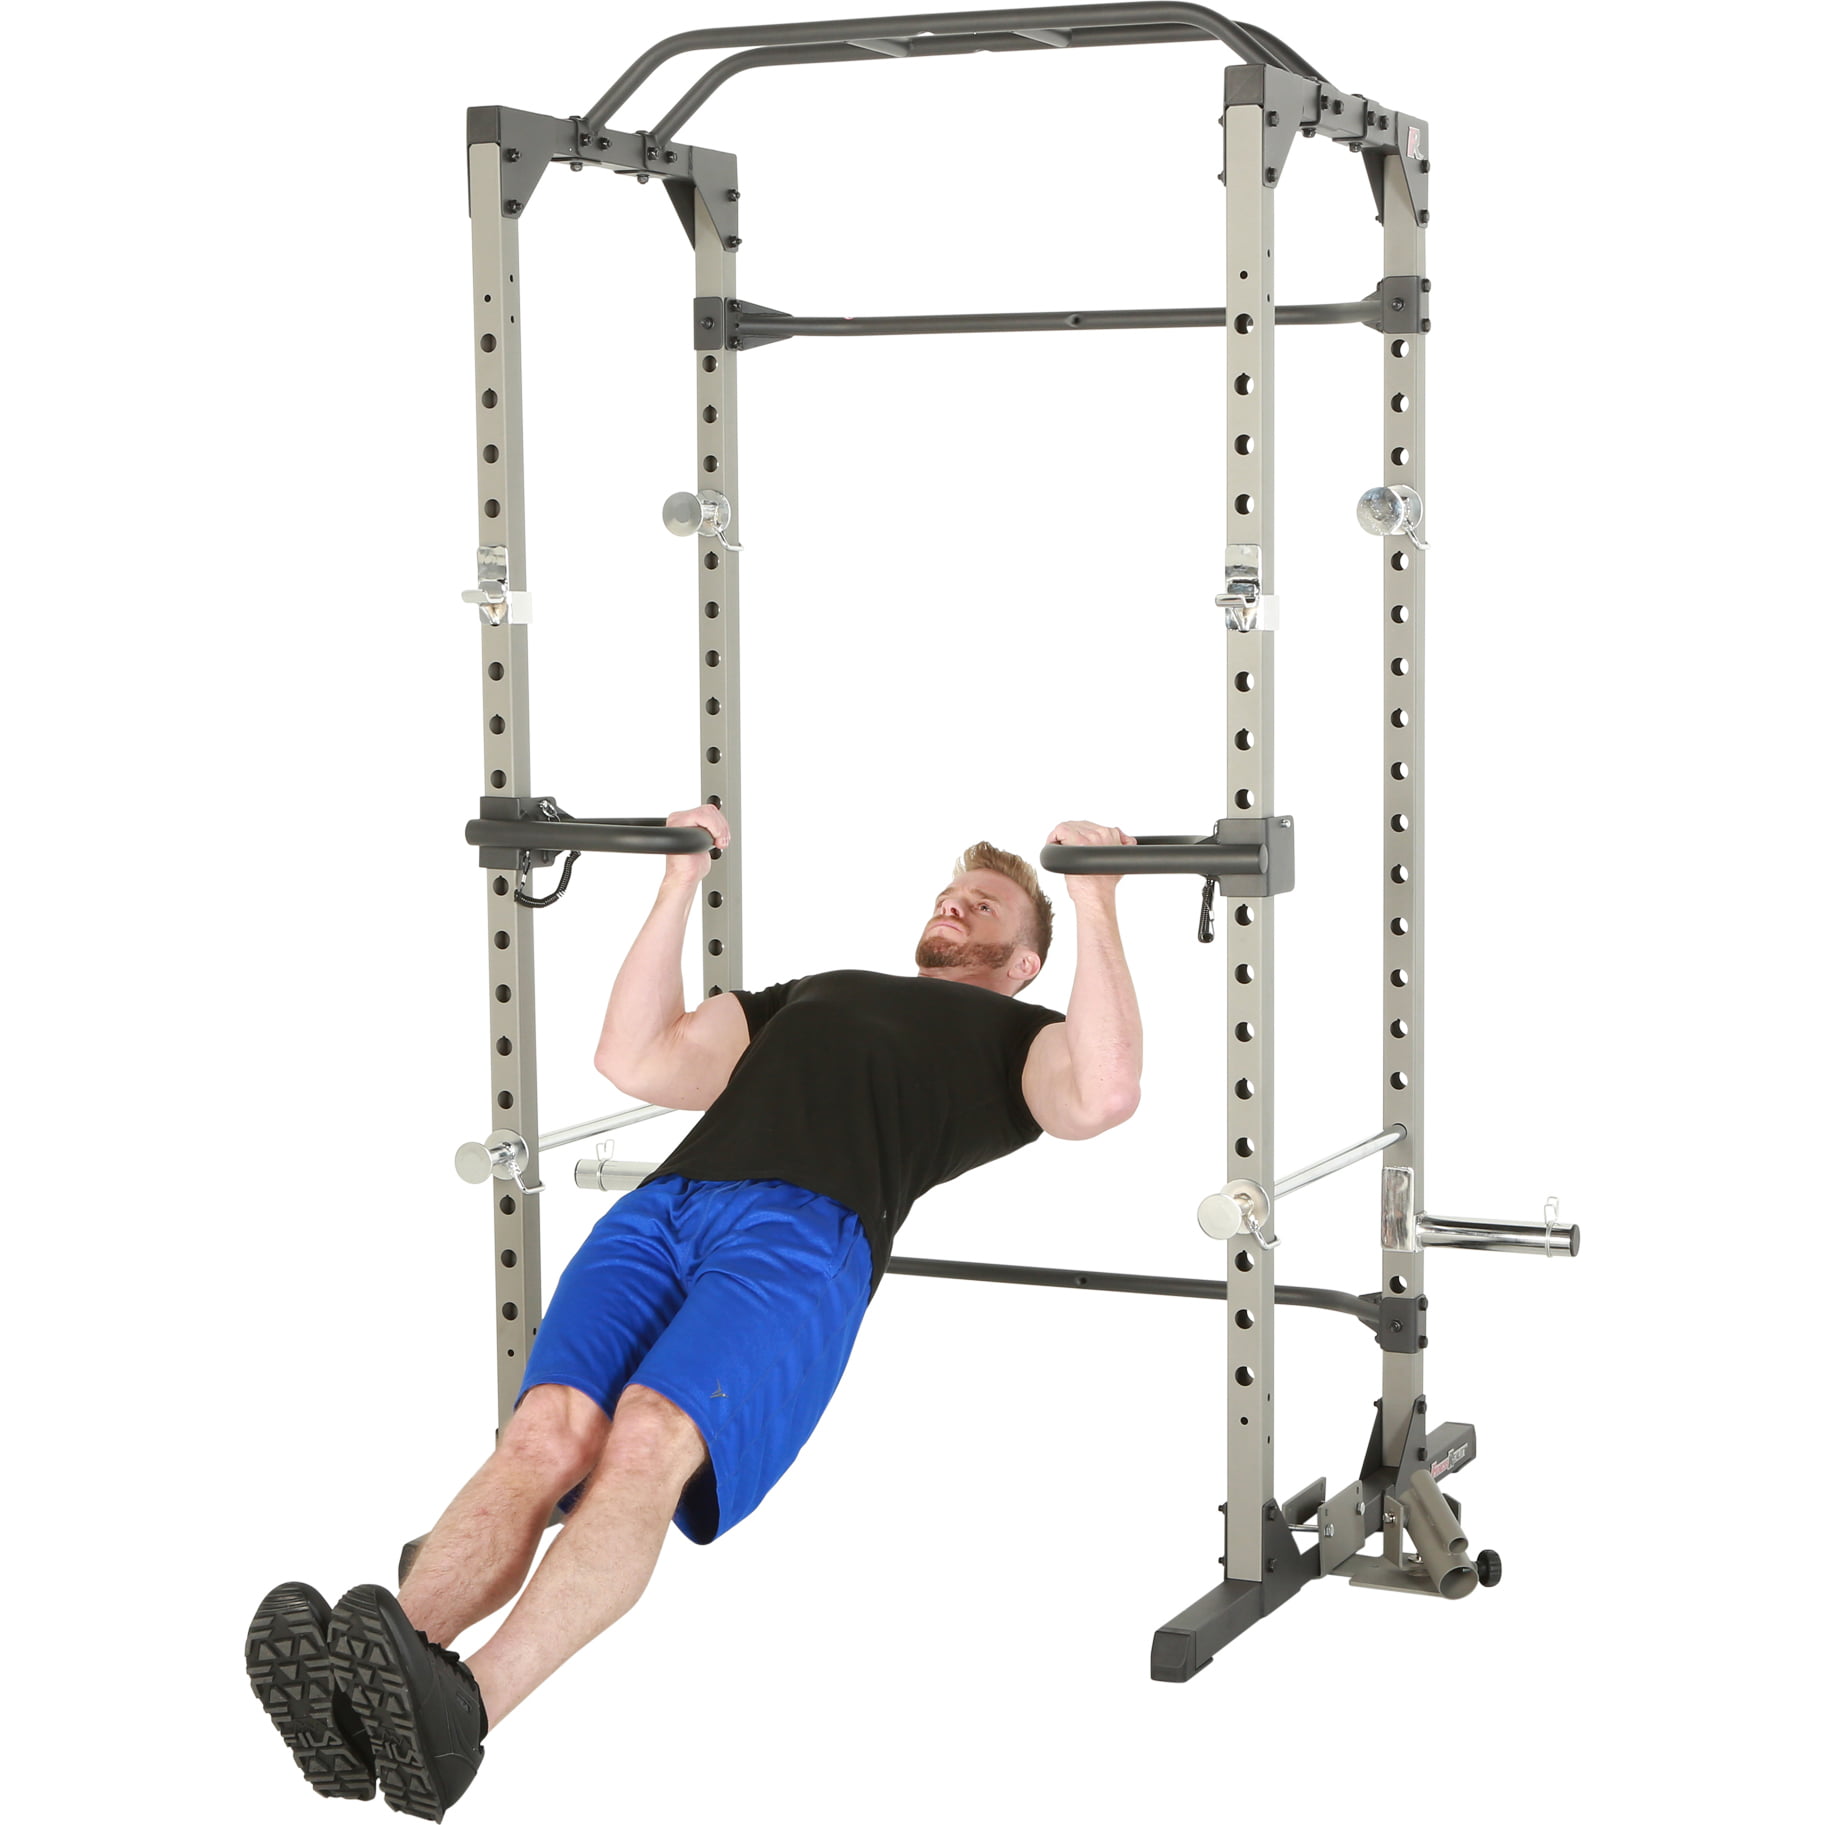 Designed to fit 2 x 2 Tube Power Racks/Power Cage with 1 Hole Powergainz Set of 2 Dip Bar Attachments 